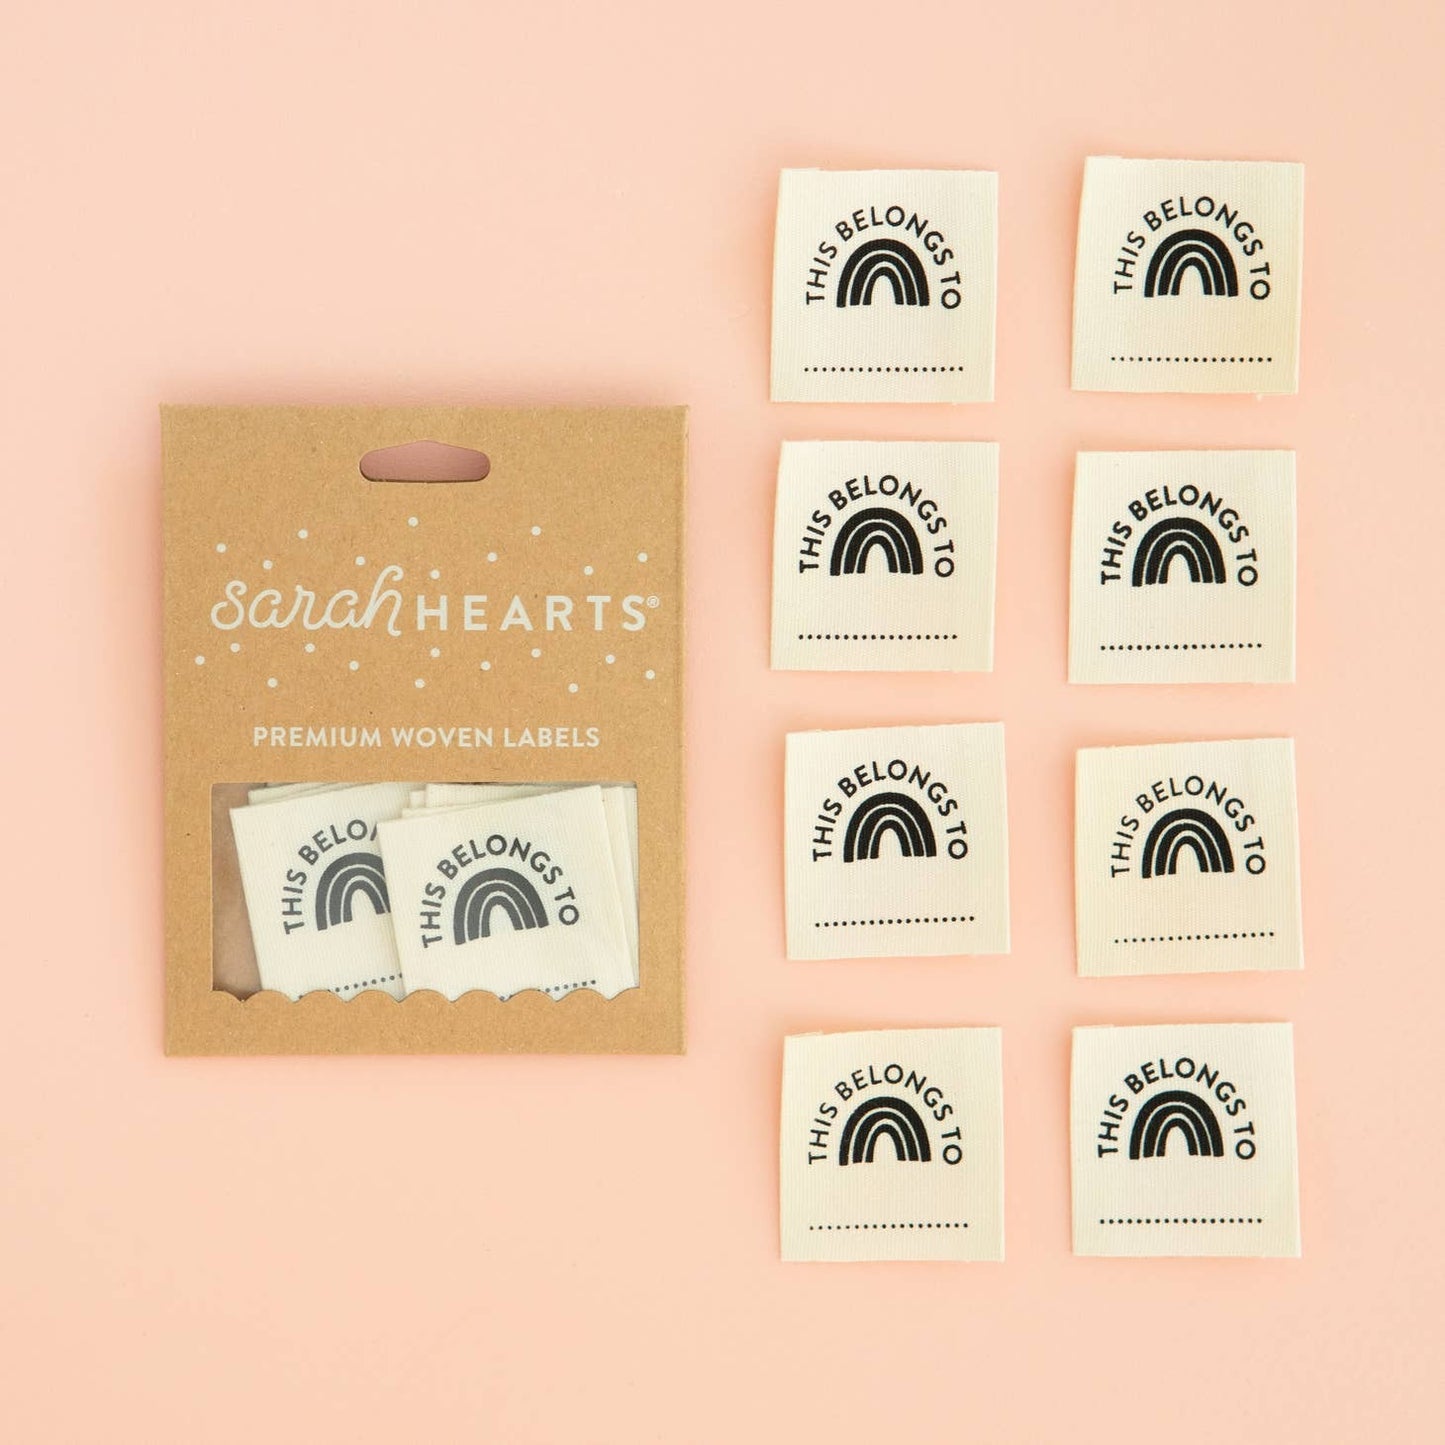 Garment Tags / Labels for Your Hand Knits